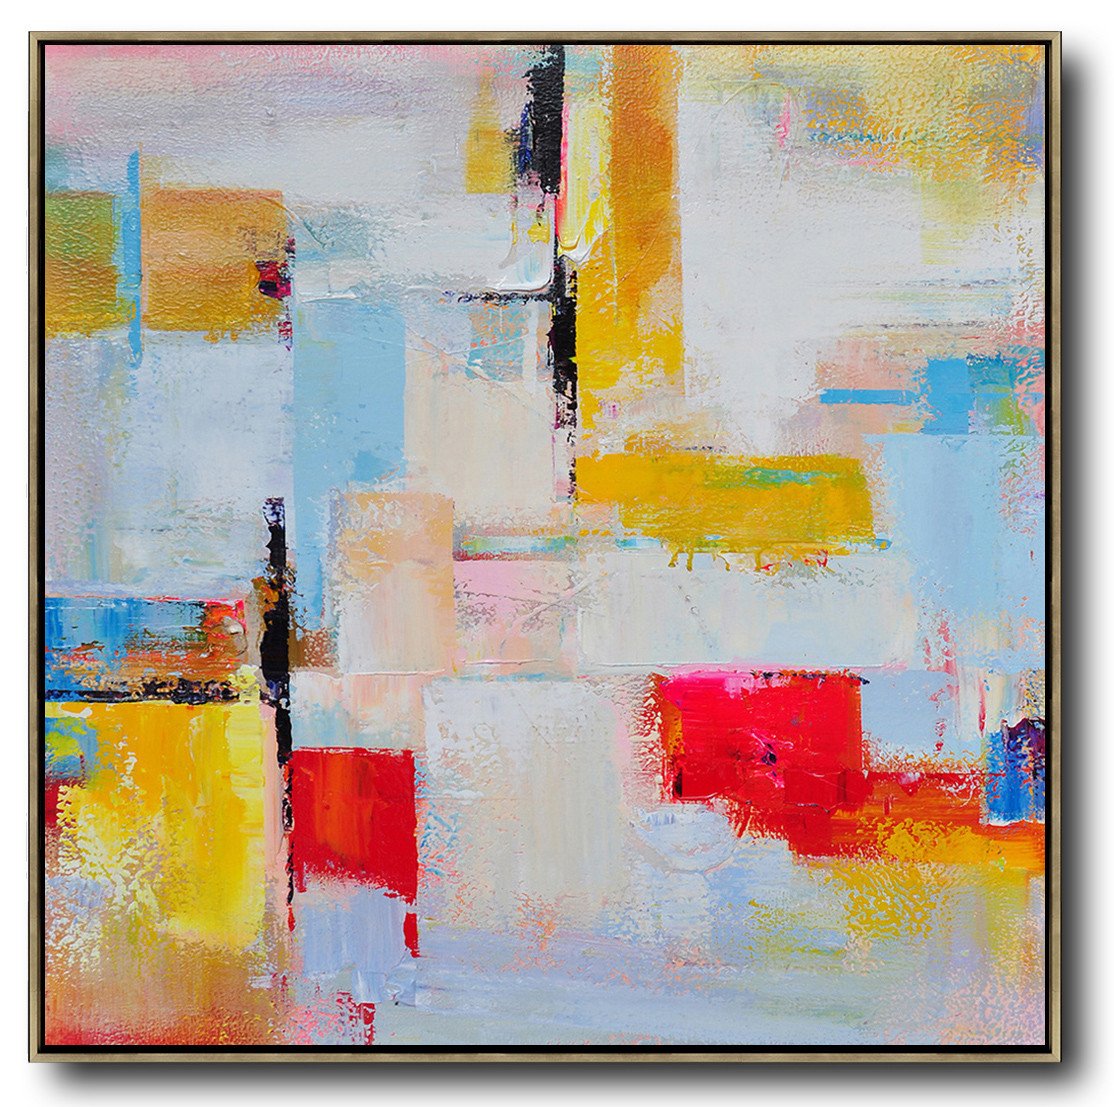 Large Abstract Painting Canvas Art,Oversized Palette Knife Painting Contemporary Art On Canvas,Canvas Painting Wall Decor,Grey,Yellow,Red,Sky Blue.etc